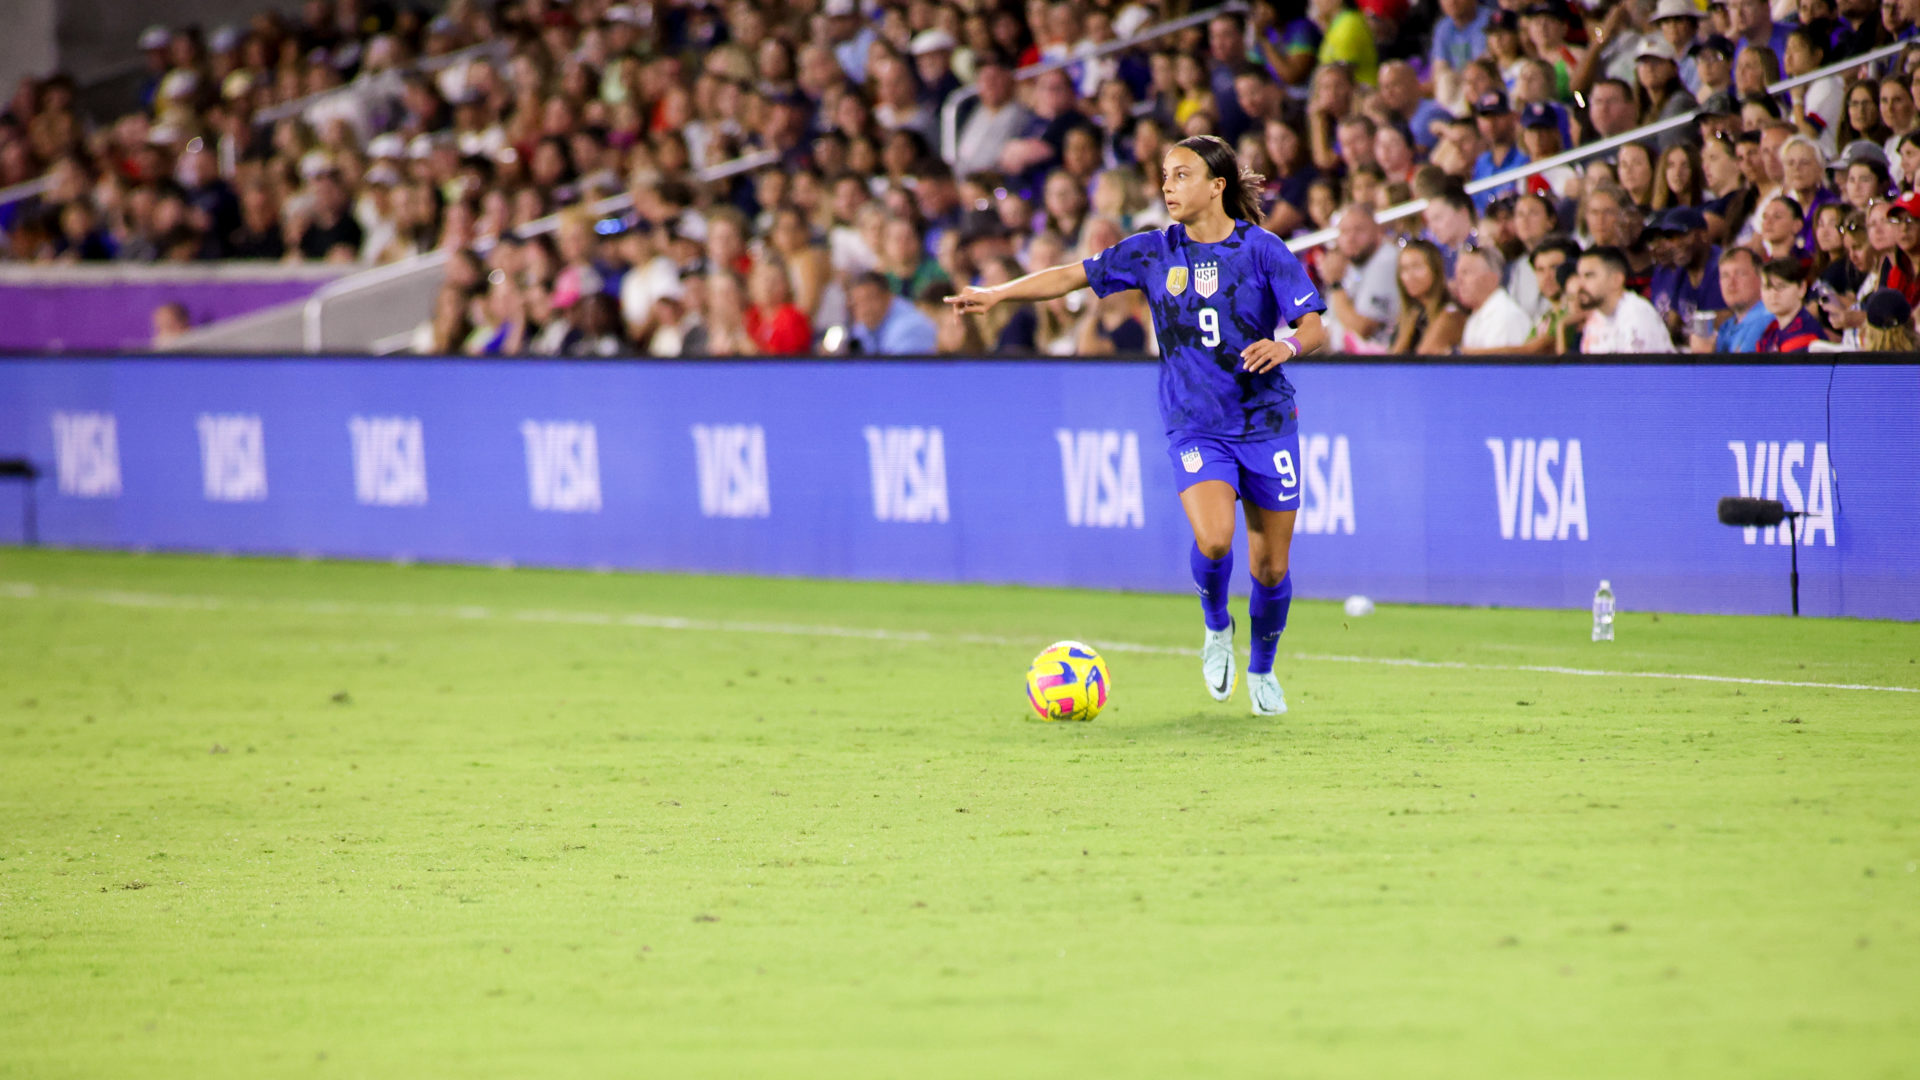 Three Thoughts from the USWNT’s win in SheBelieves Cup opener